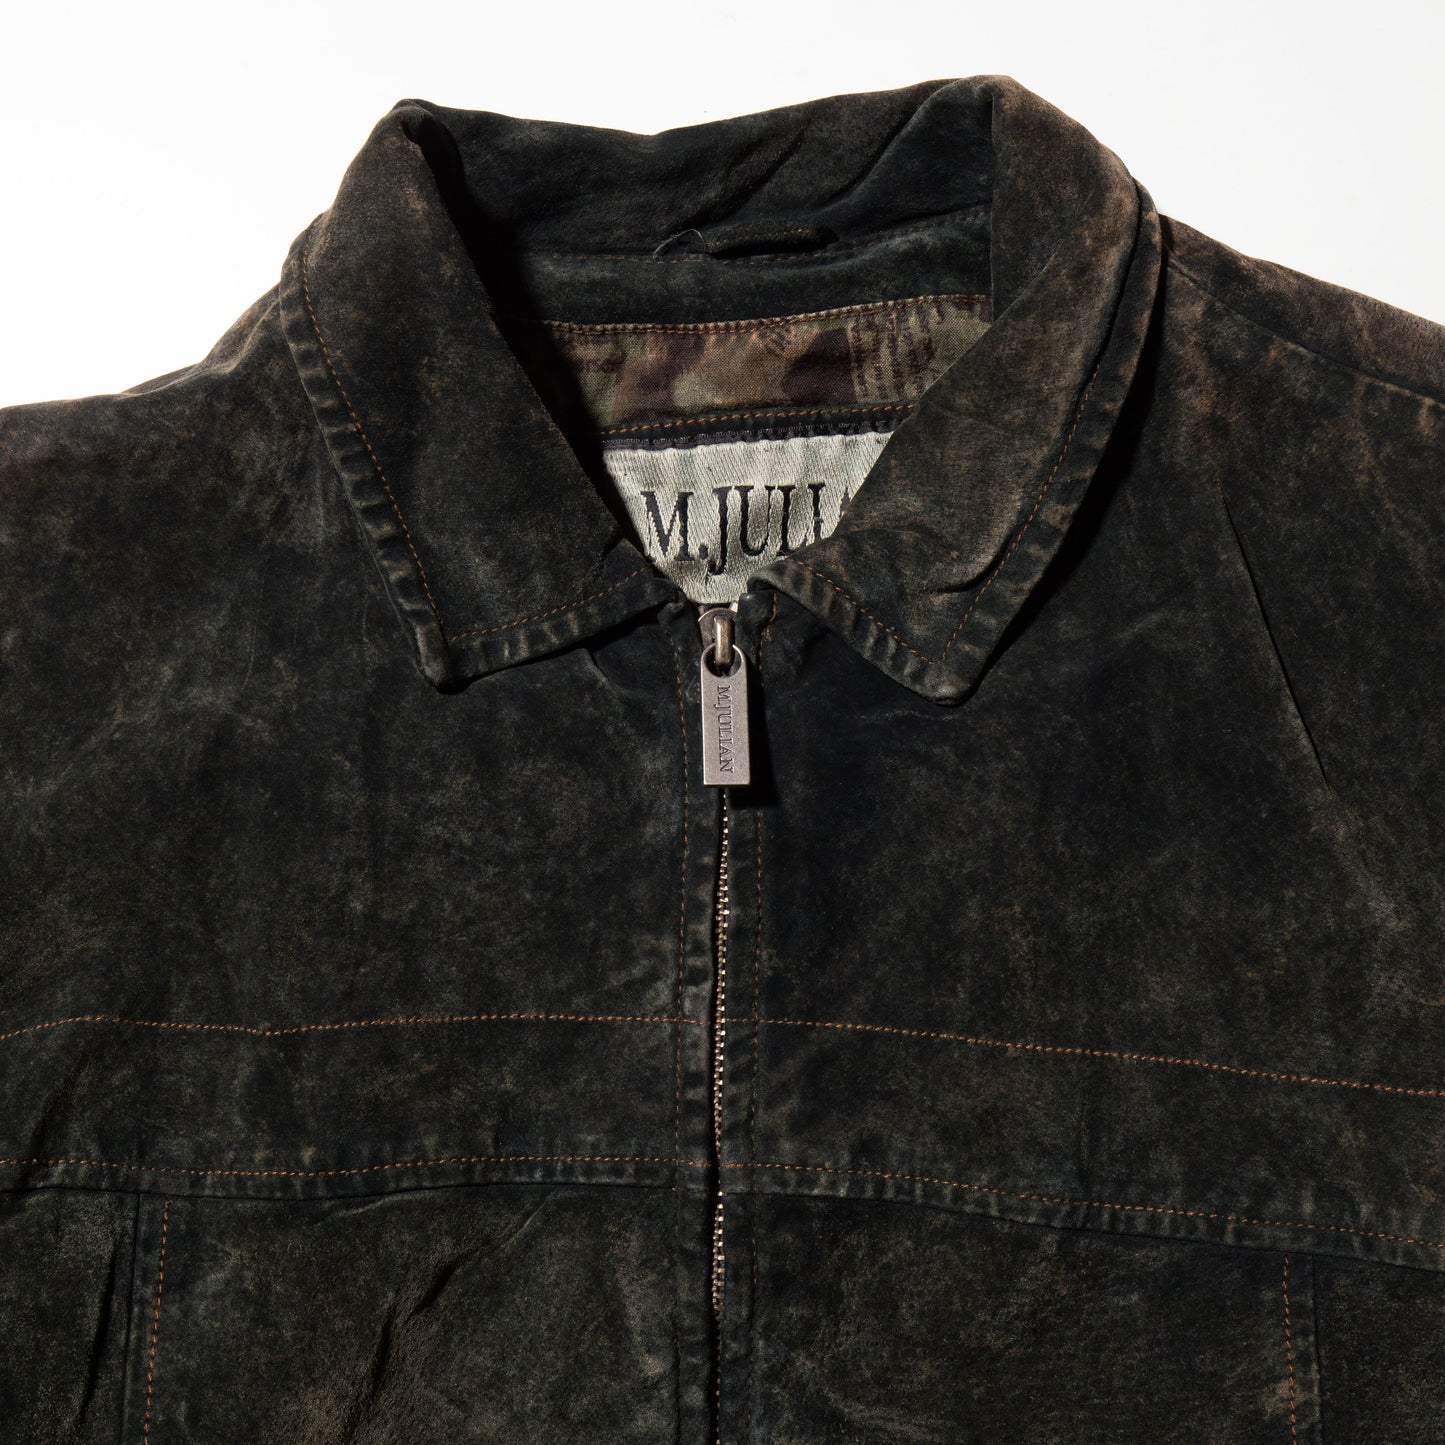 vintage faded suede leather jacket